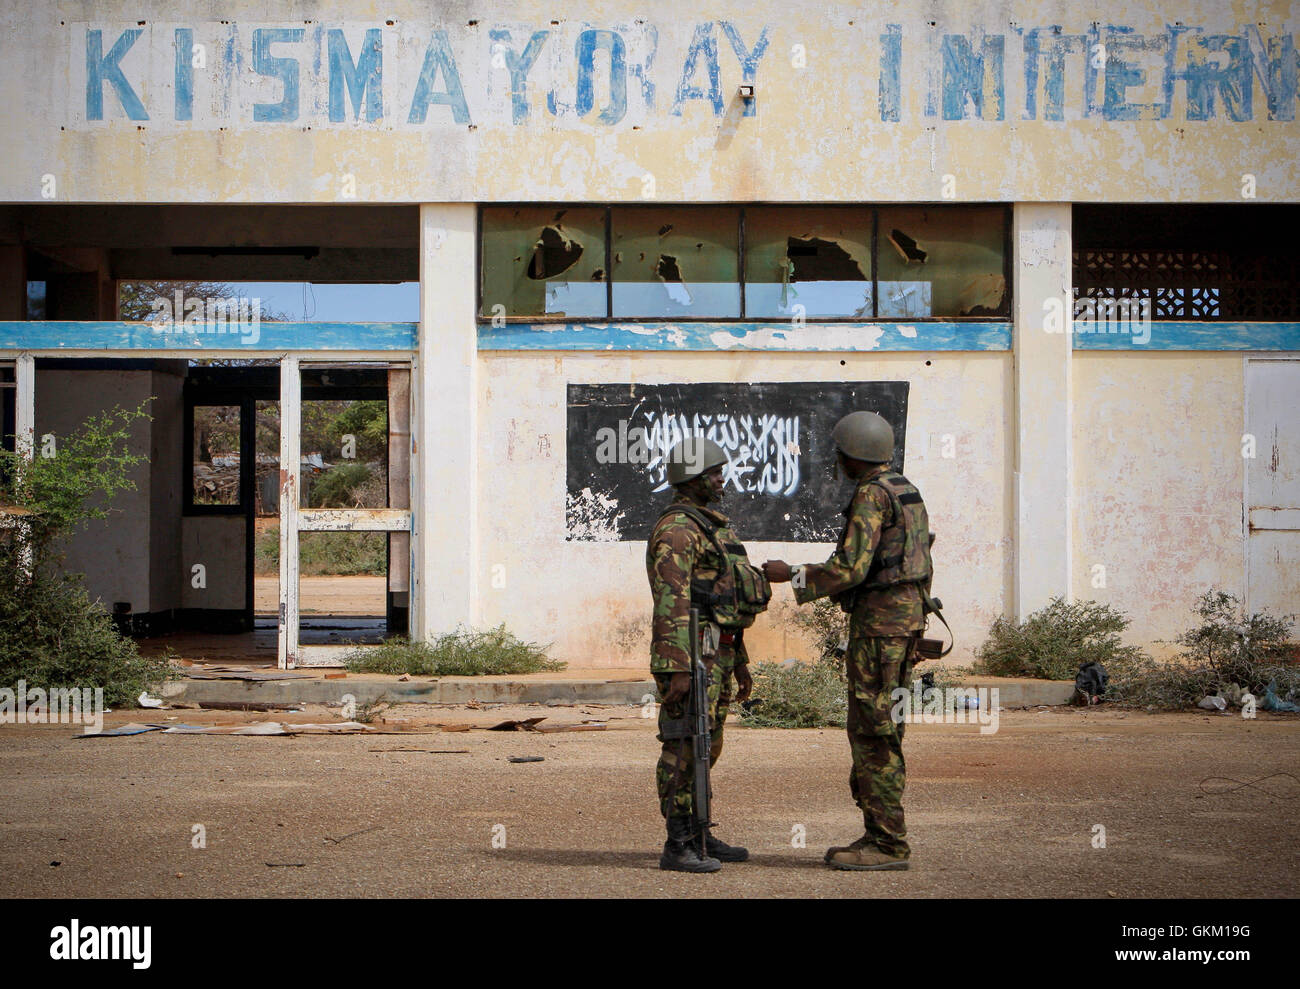 SOMALIA, Kismayo: In a handout photograph released by the African Union-United Nations Information Support Team 02 October, soldiers of the Kenyan Contingent serving with the African Union Mission in Somalia (AMISOM) stand in front of the black flag of the Al Qaeda-affiliated extremist group Al Shabaab painted on the wall of Kismayo Airport. Kenyan AMISOM troops moved into and through Kismayo, the hitherto last major urban stronghold of tAl Shabaab, on their way to the airport without a shot being fired following a two-month operation to liberate towns and villages across southern Somalia and  Stock Photo